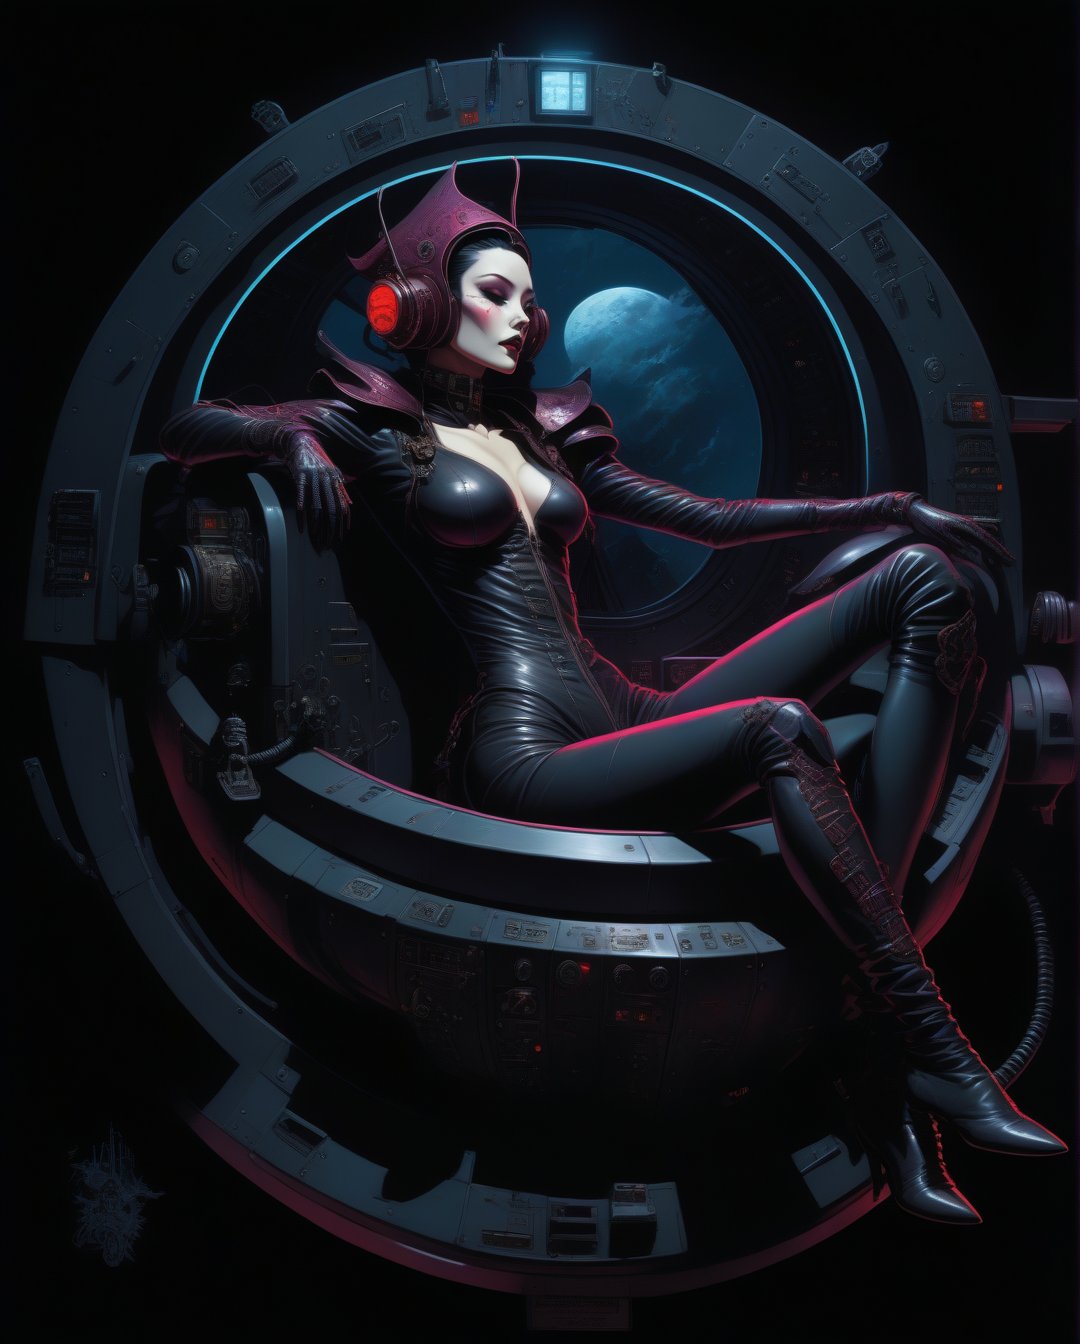 Art style by amano yoshitaka, ((mature)) gothic lying ((in a ruby goth cockpit)), (lying on a baroque pilot cockpit), ((gothic control panels everywhere)), (headgear), ((mature)), ruby cockpit, ((vampiric cockpit)), iridescent pilot bodysuit, lace accesories, ((serious tone)), elegant, futuristic, vampiric, full body view from above, action pose, (fisheye), [close up], dark place, dramatic lighting, intricate control panel details, steaming, 1990s (style), in the style of nicola samori, detailed 8k horror artwork,, Norman Rockwell style, Vibrant color scheme, Nanette Fluhr, Caricatural, Matte tones, don maitz, minimalist masterpiece, Digital art anime, Flat illustration, elegant lines and shading, dark pastels, color gradient,vaporwave style